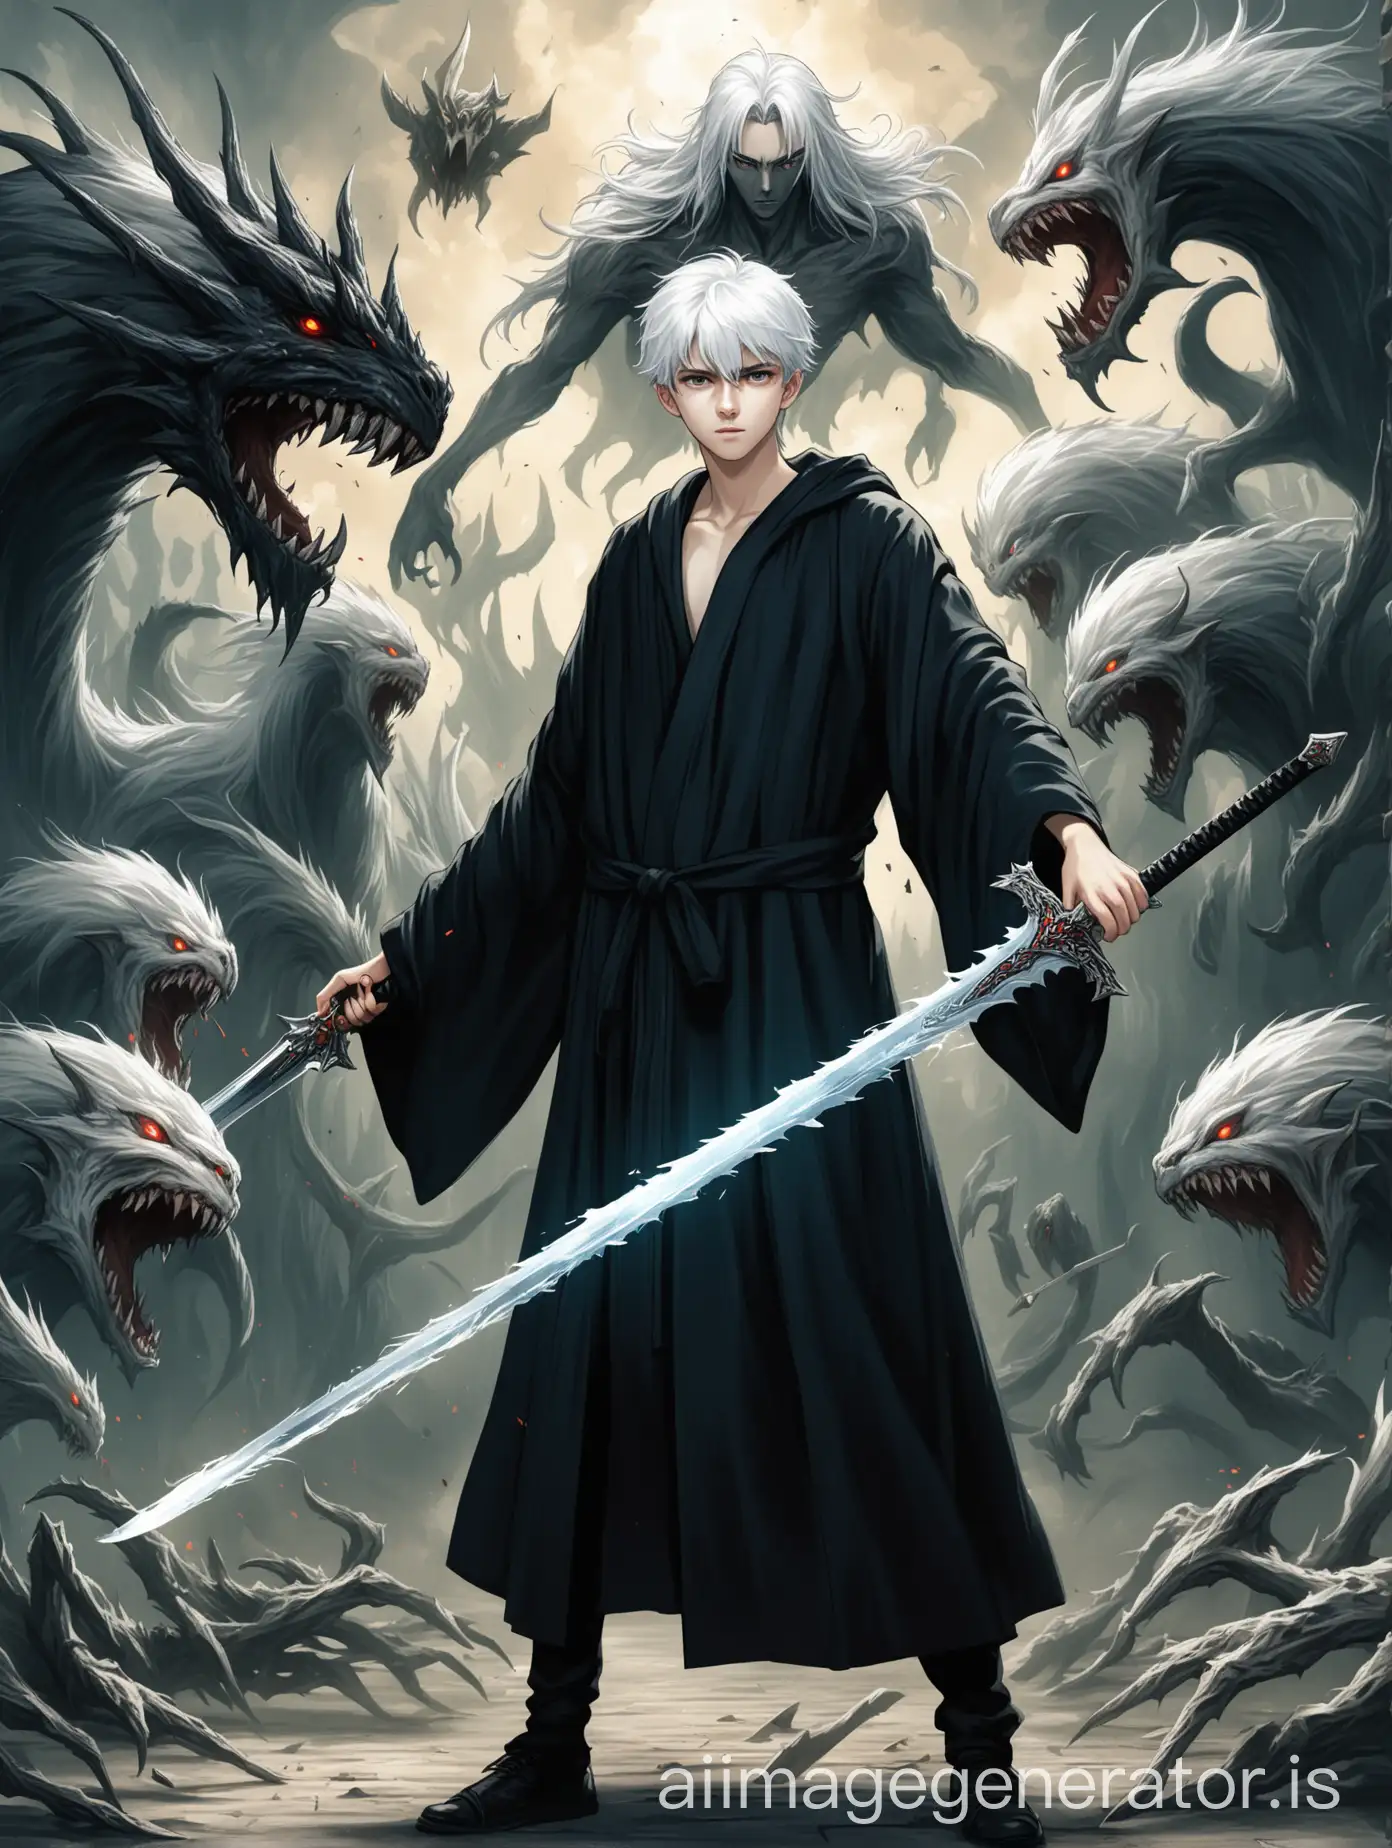 WhiteHaired-Teenager-Battling-Monsters-with-Mysterious-Sword